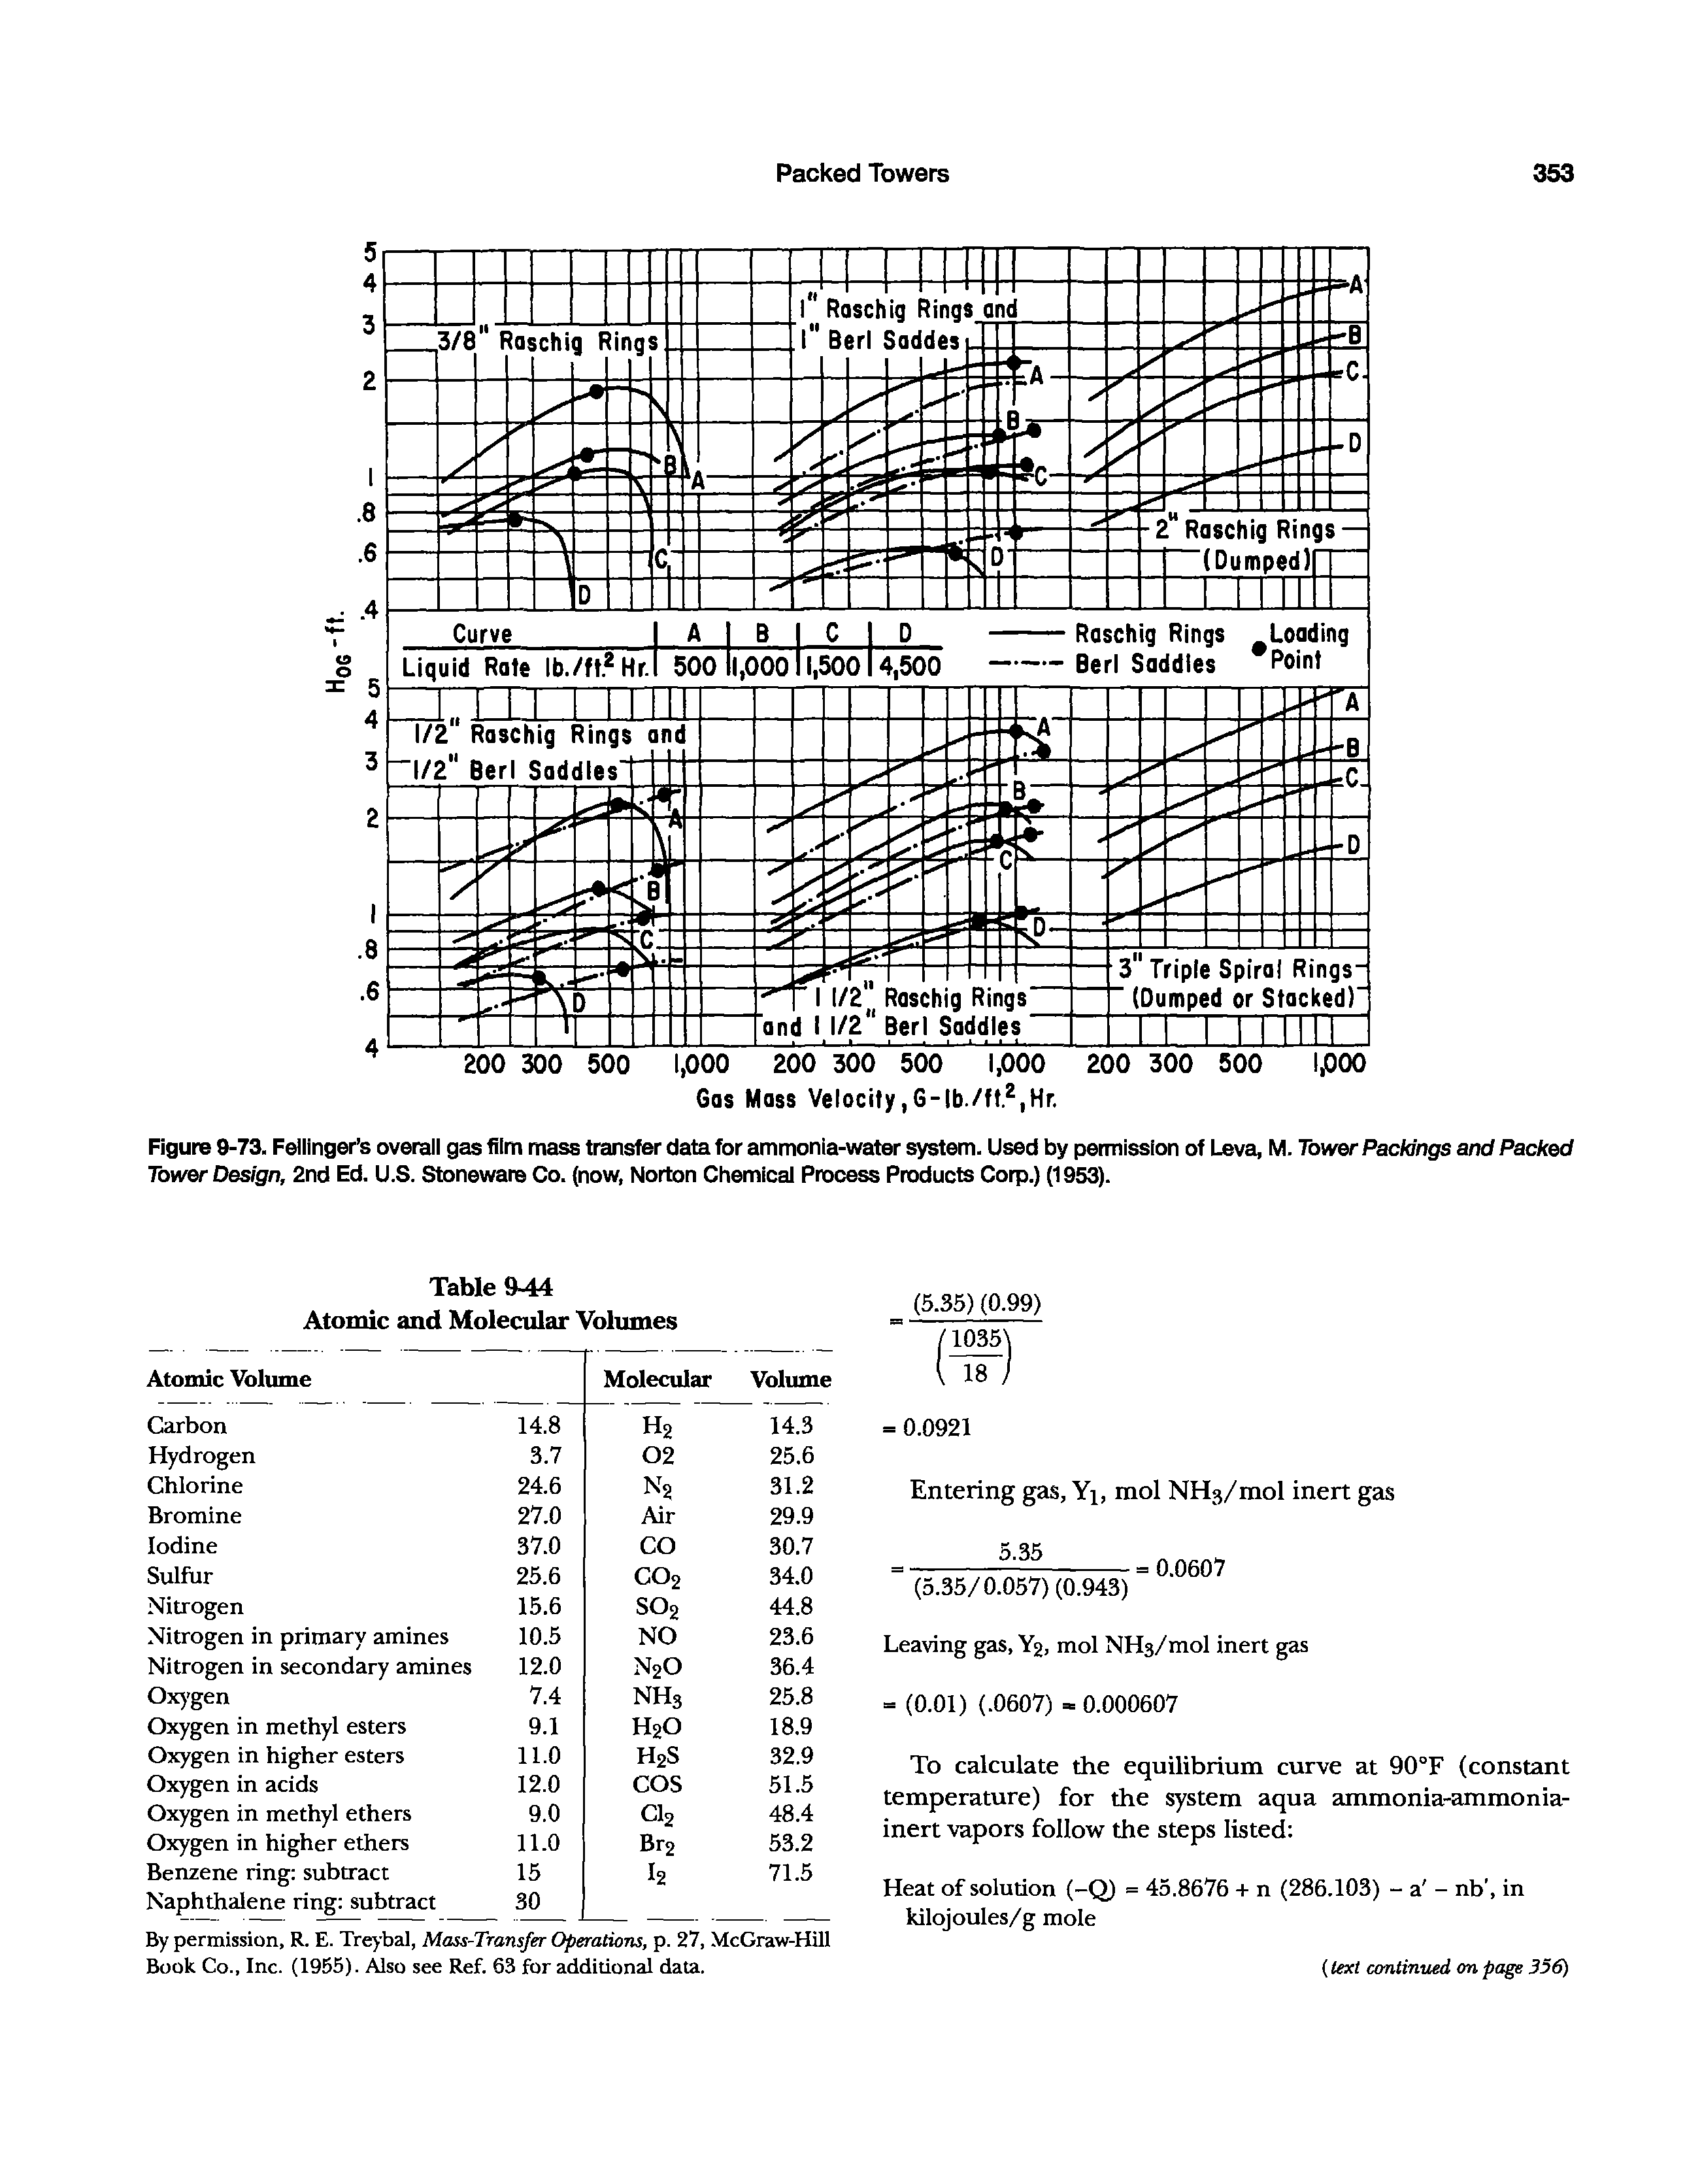 Figure 9-73. Fellinger s overall gas film mass transfer data for ammonia-water system. Used by permission of Leva, M. Tower Packings and Packed Tower Design, 2nd Ed. U.S. Stoneware Co. (now, Norton Chemical Process Products Corp.) (1953).